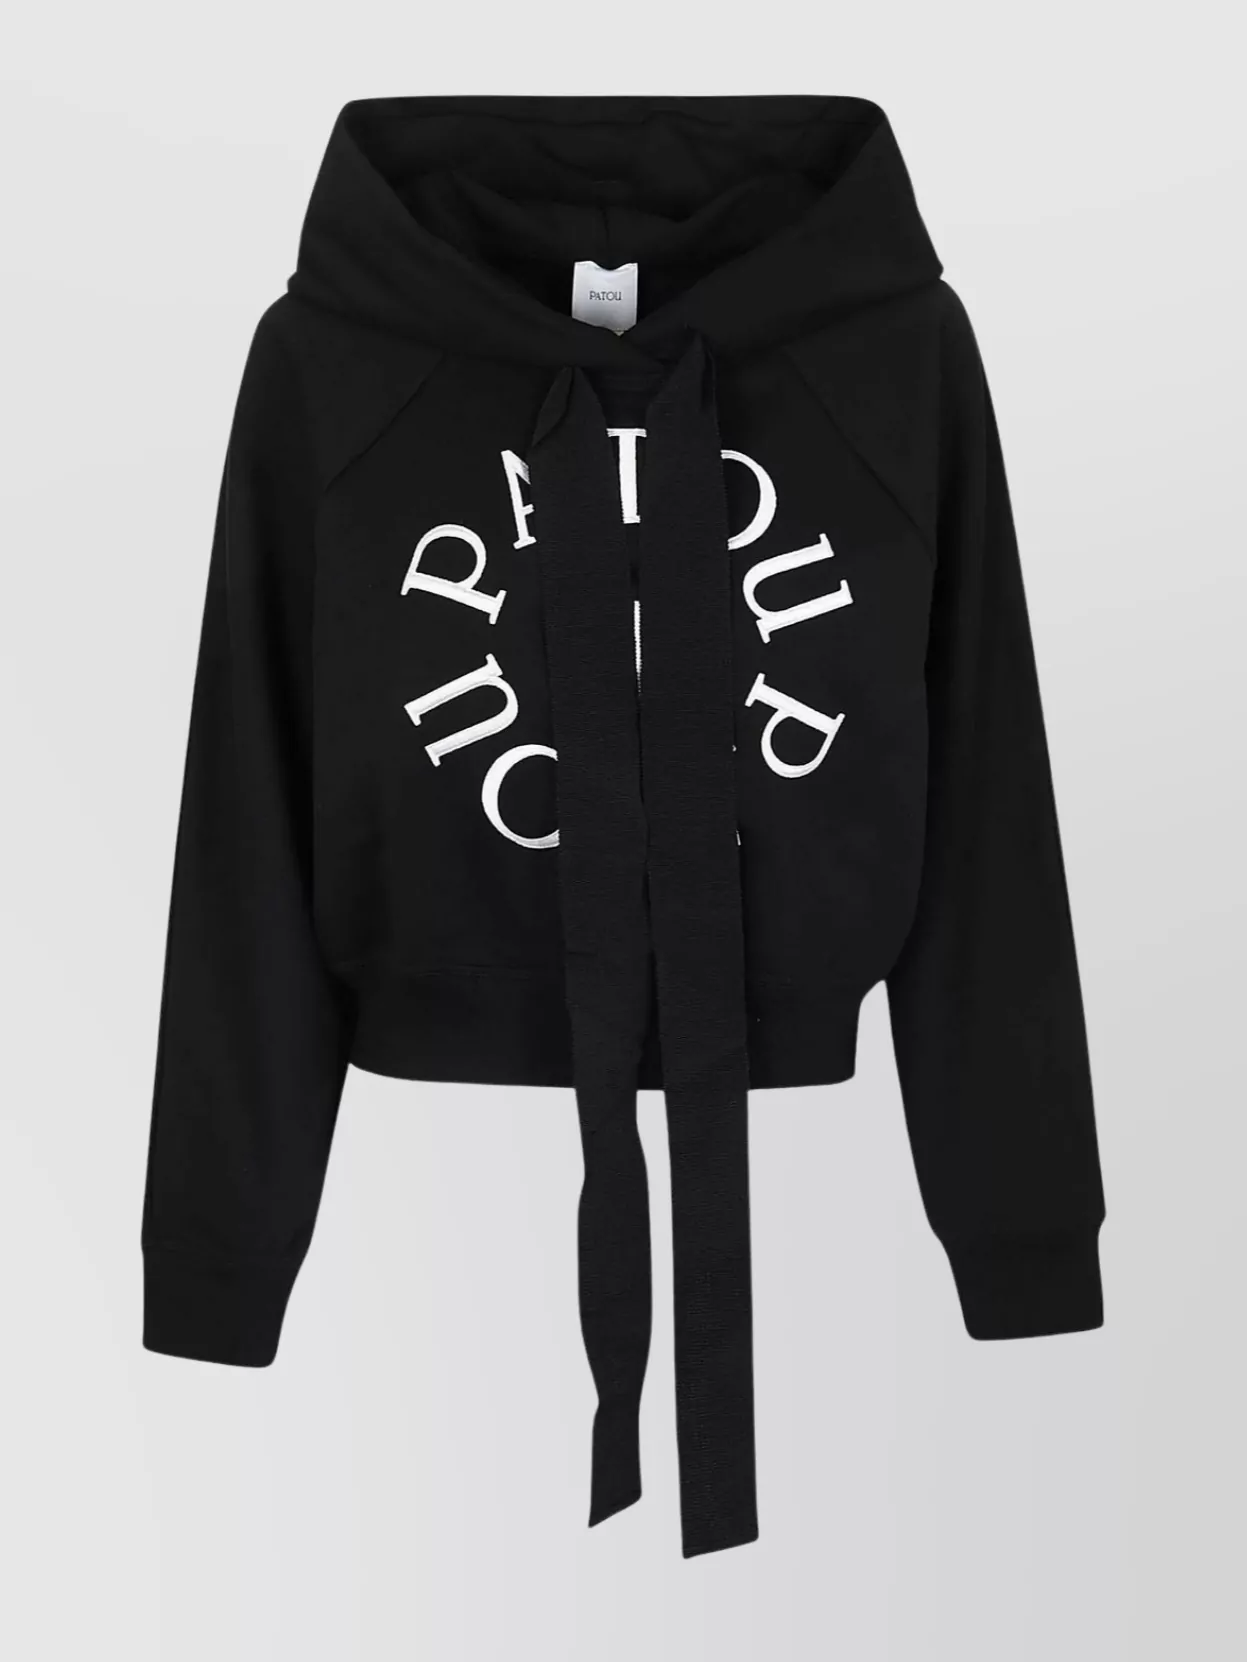 Patou Cropped Logo Hooded Top